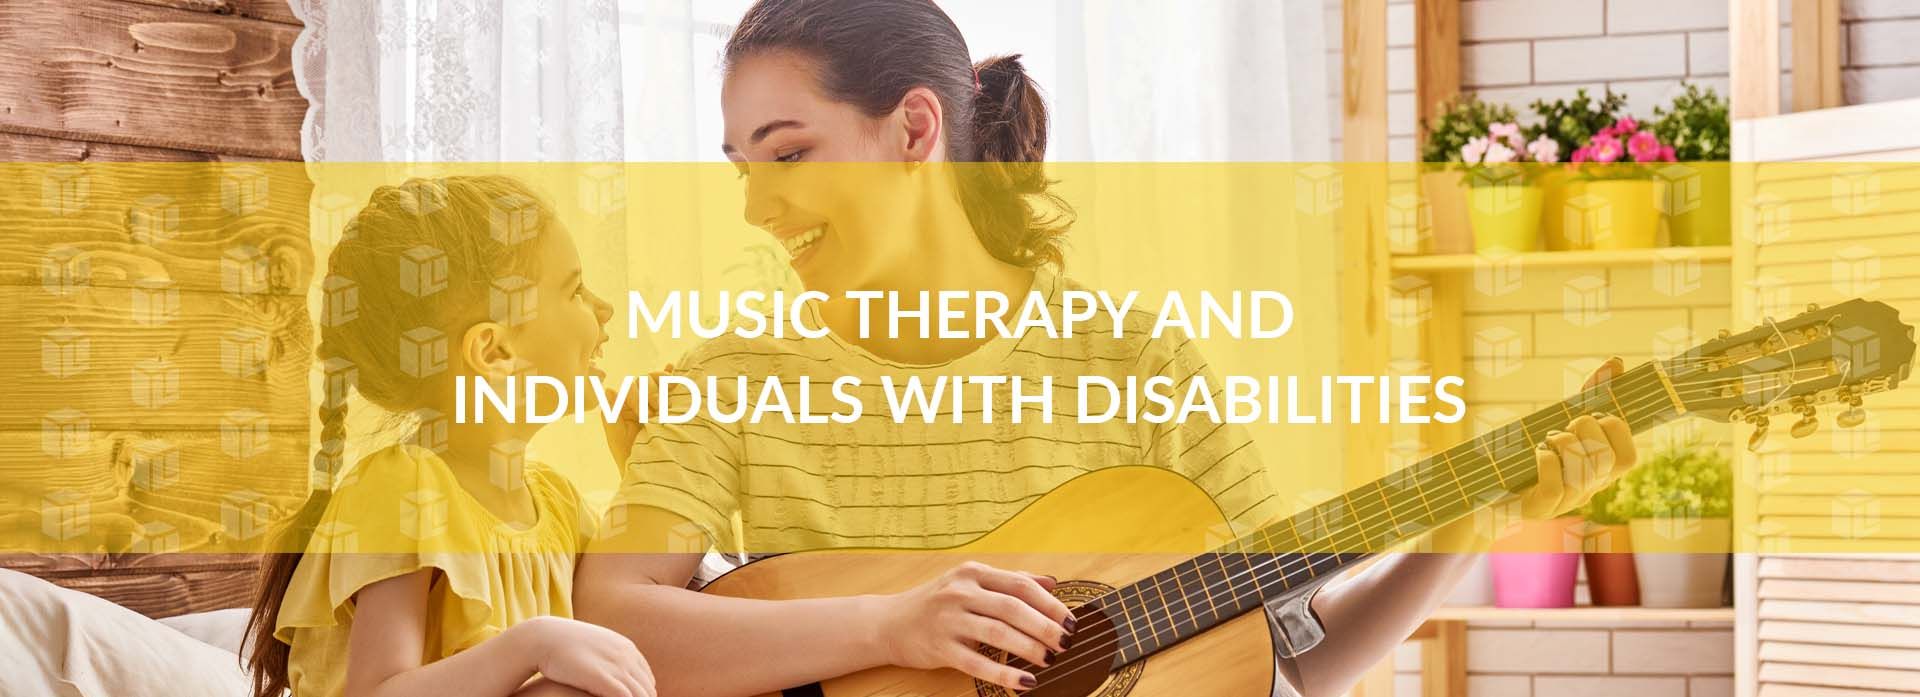 Music Therapy And Individuals With Disabilities Music Therapy And Individuals With Disabilities Music Therapy And Individuals With Disabilities Music Therapy And Individuals With Disabilities